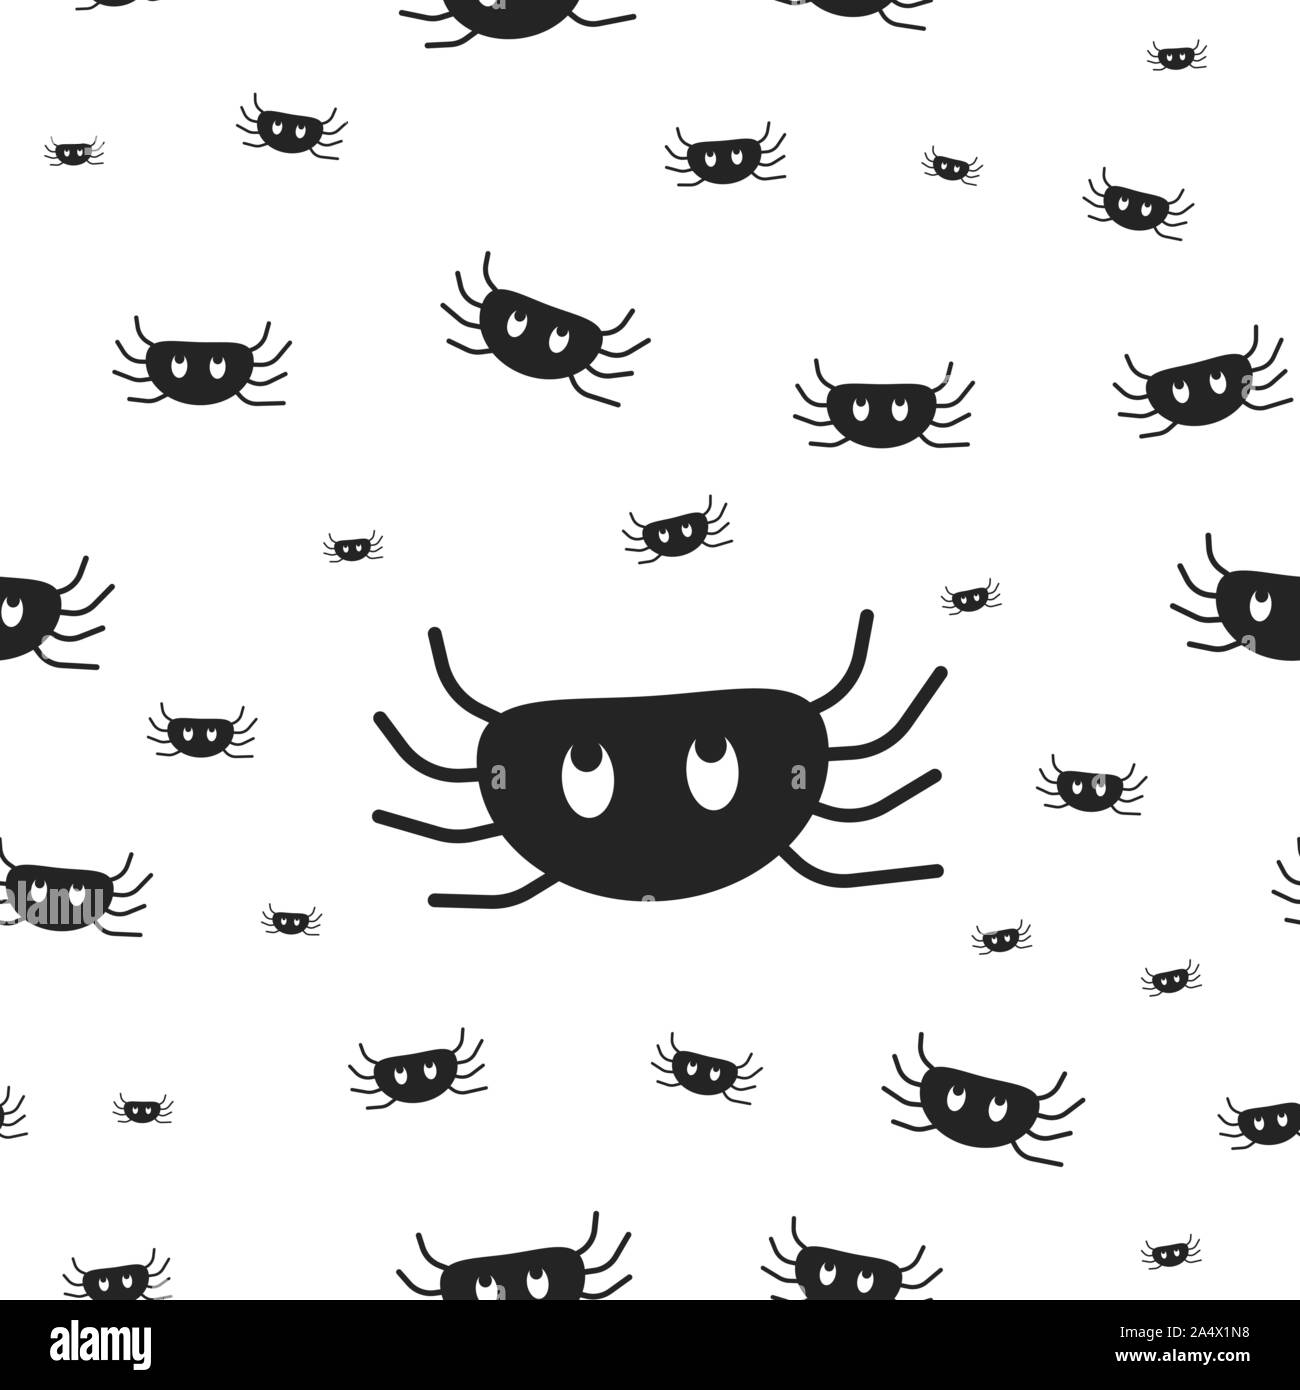 Spiders wrapping paper seamless pattern for Halloween greeting card. Simple paper cute spider texture, horror symbol, black vector illustration on Stock Vector